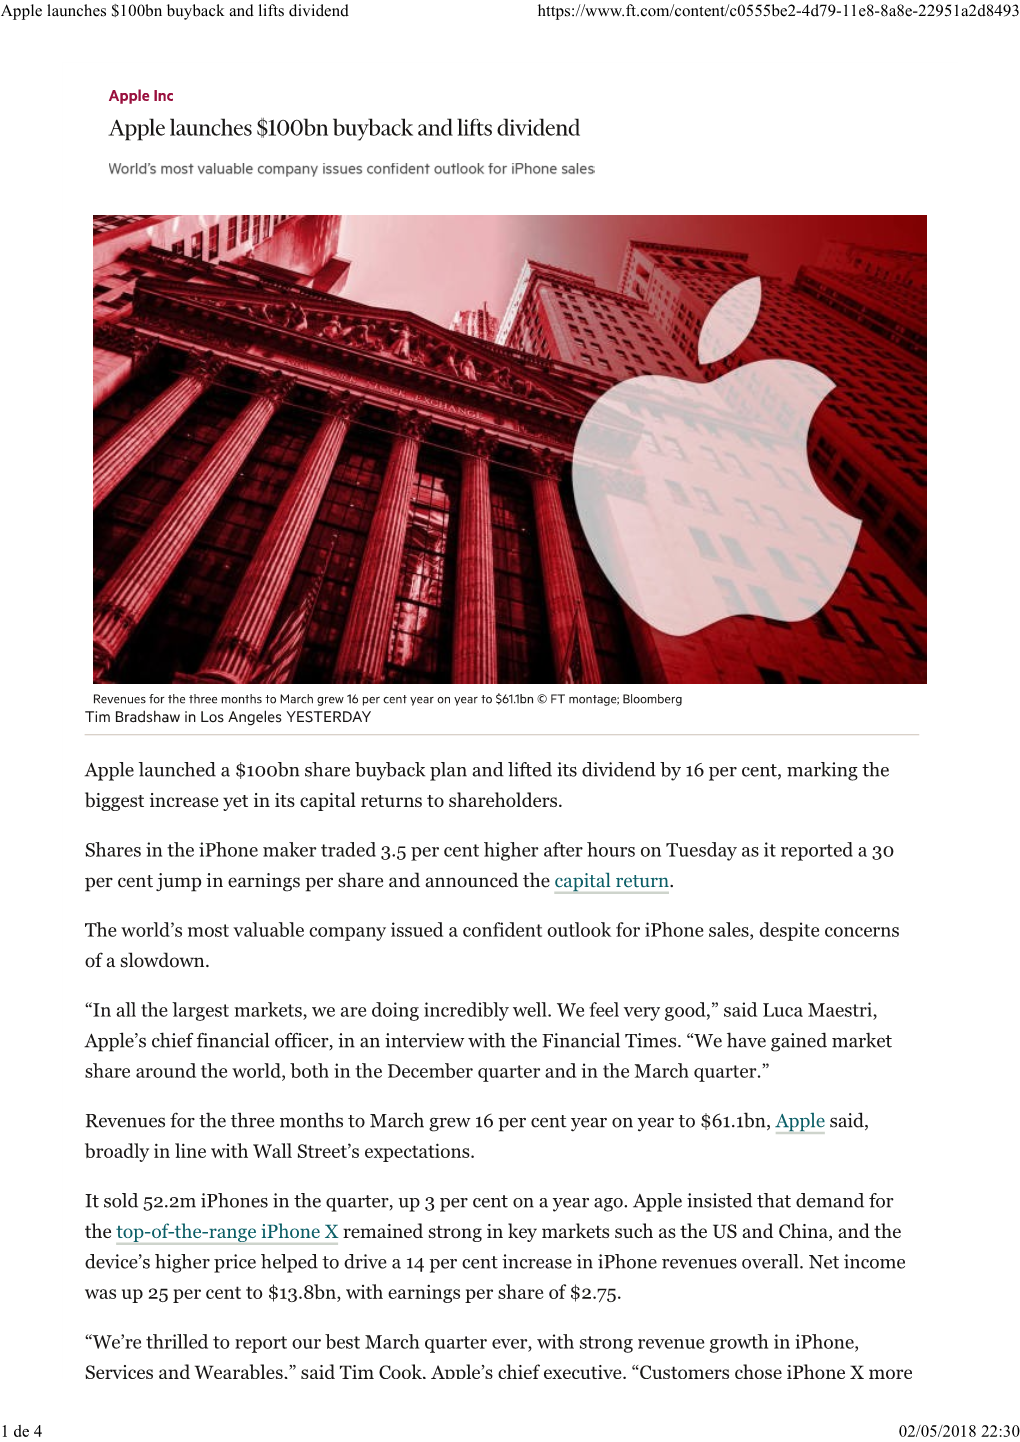 Apple Launches $100Bn Buyback and Lifts Dividend